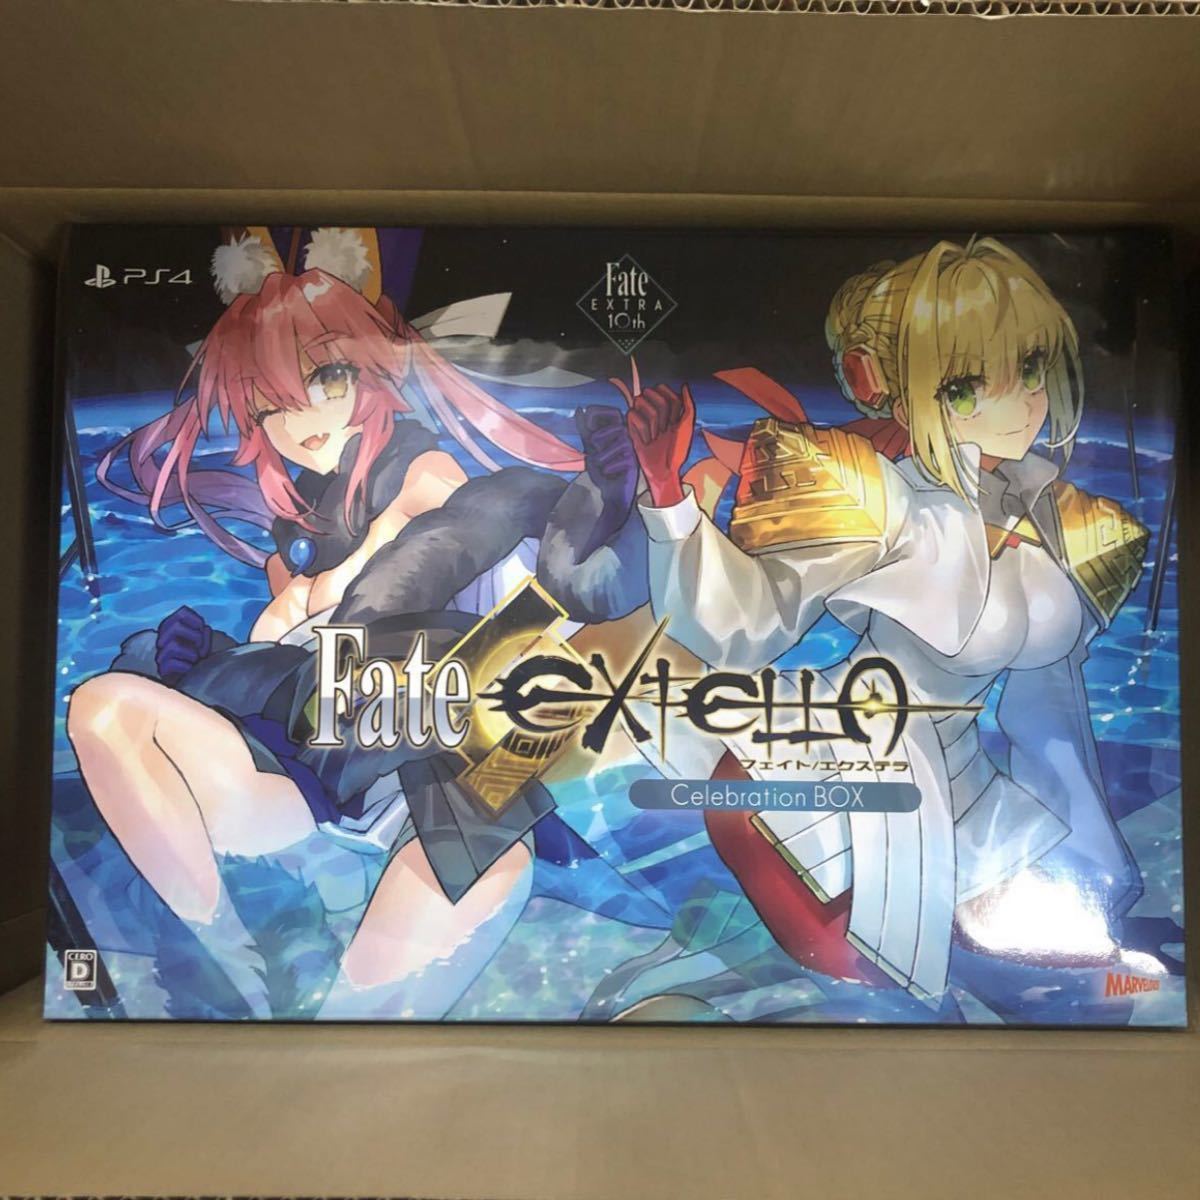 PS4 Fate/EXTELLA Celebration BOX for PS4